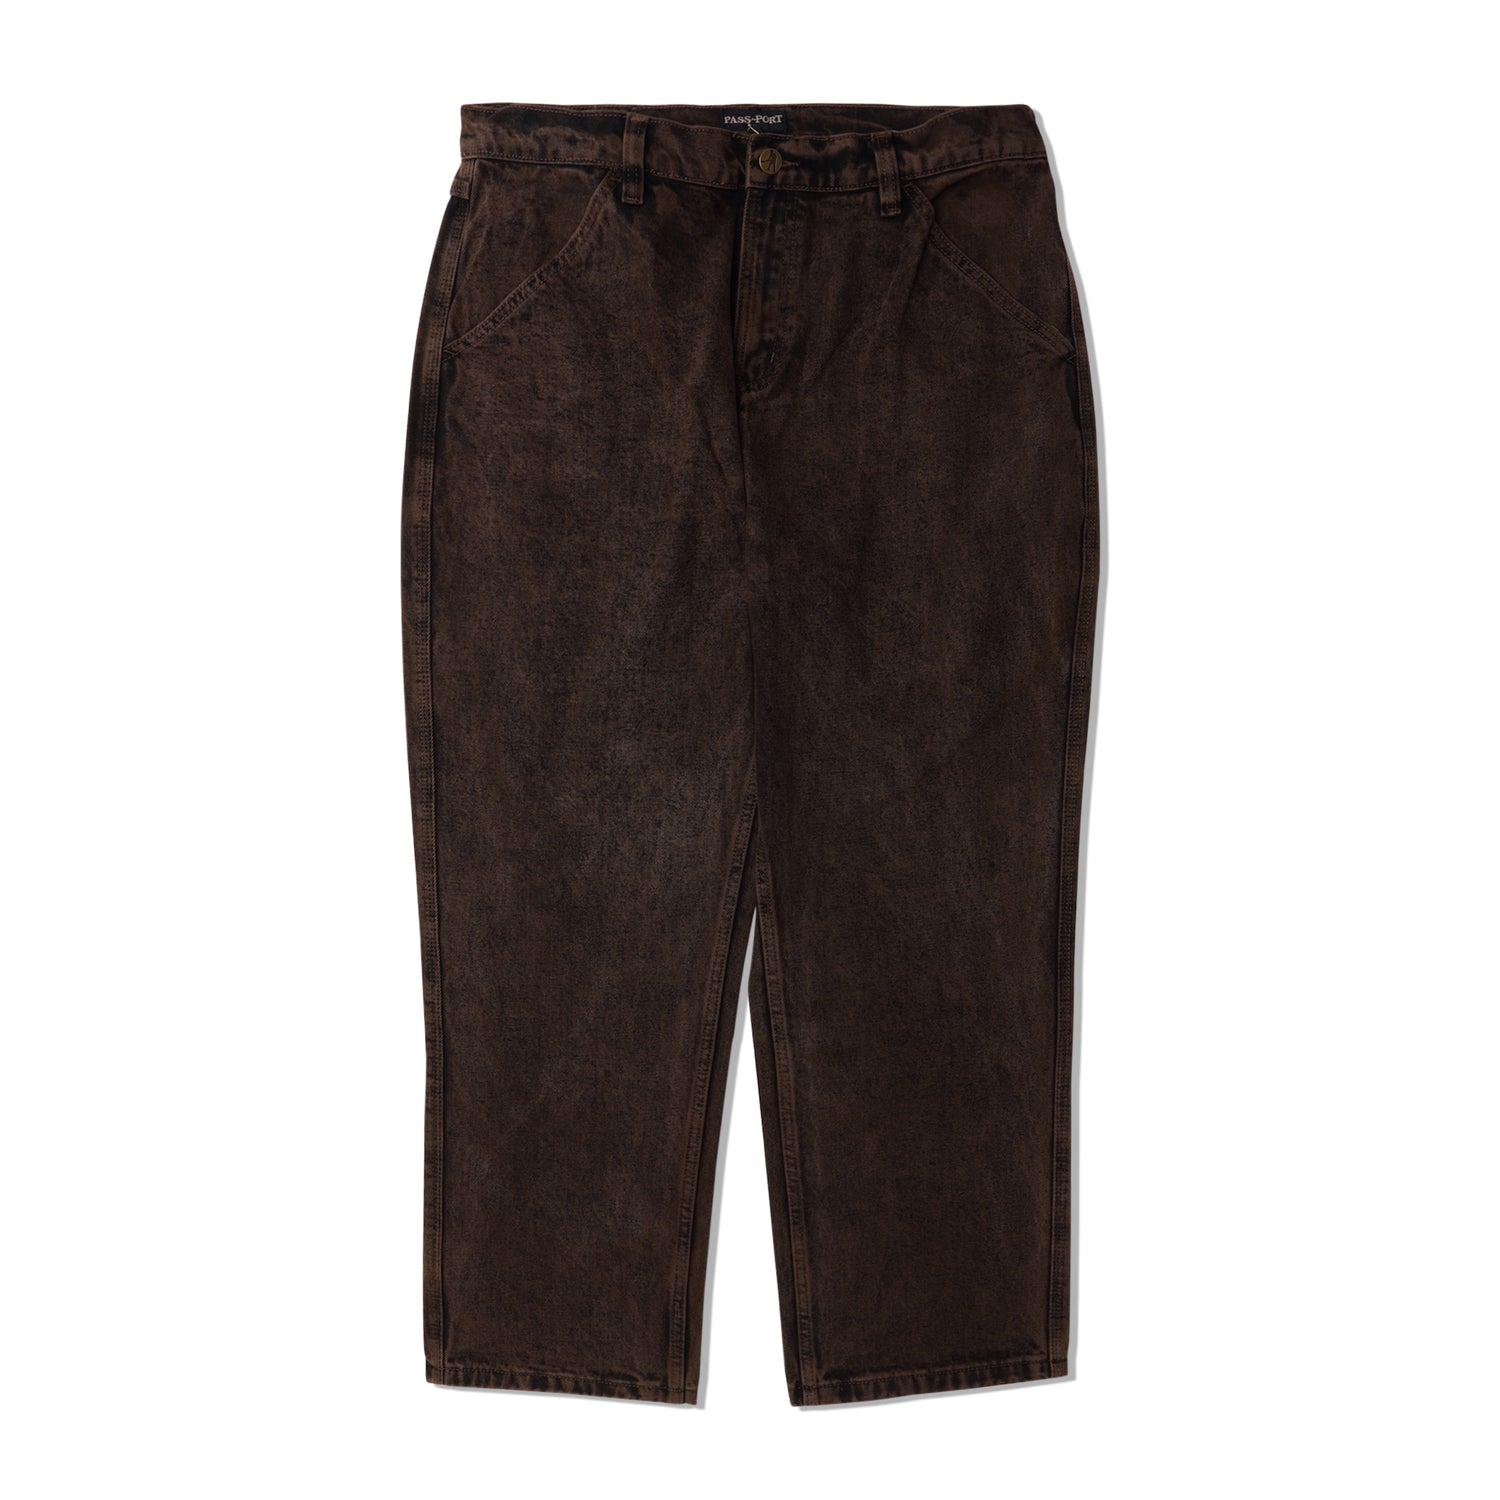 Workers Club Jeans, Overdye Brown